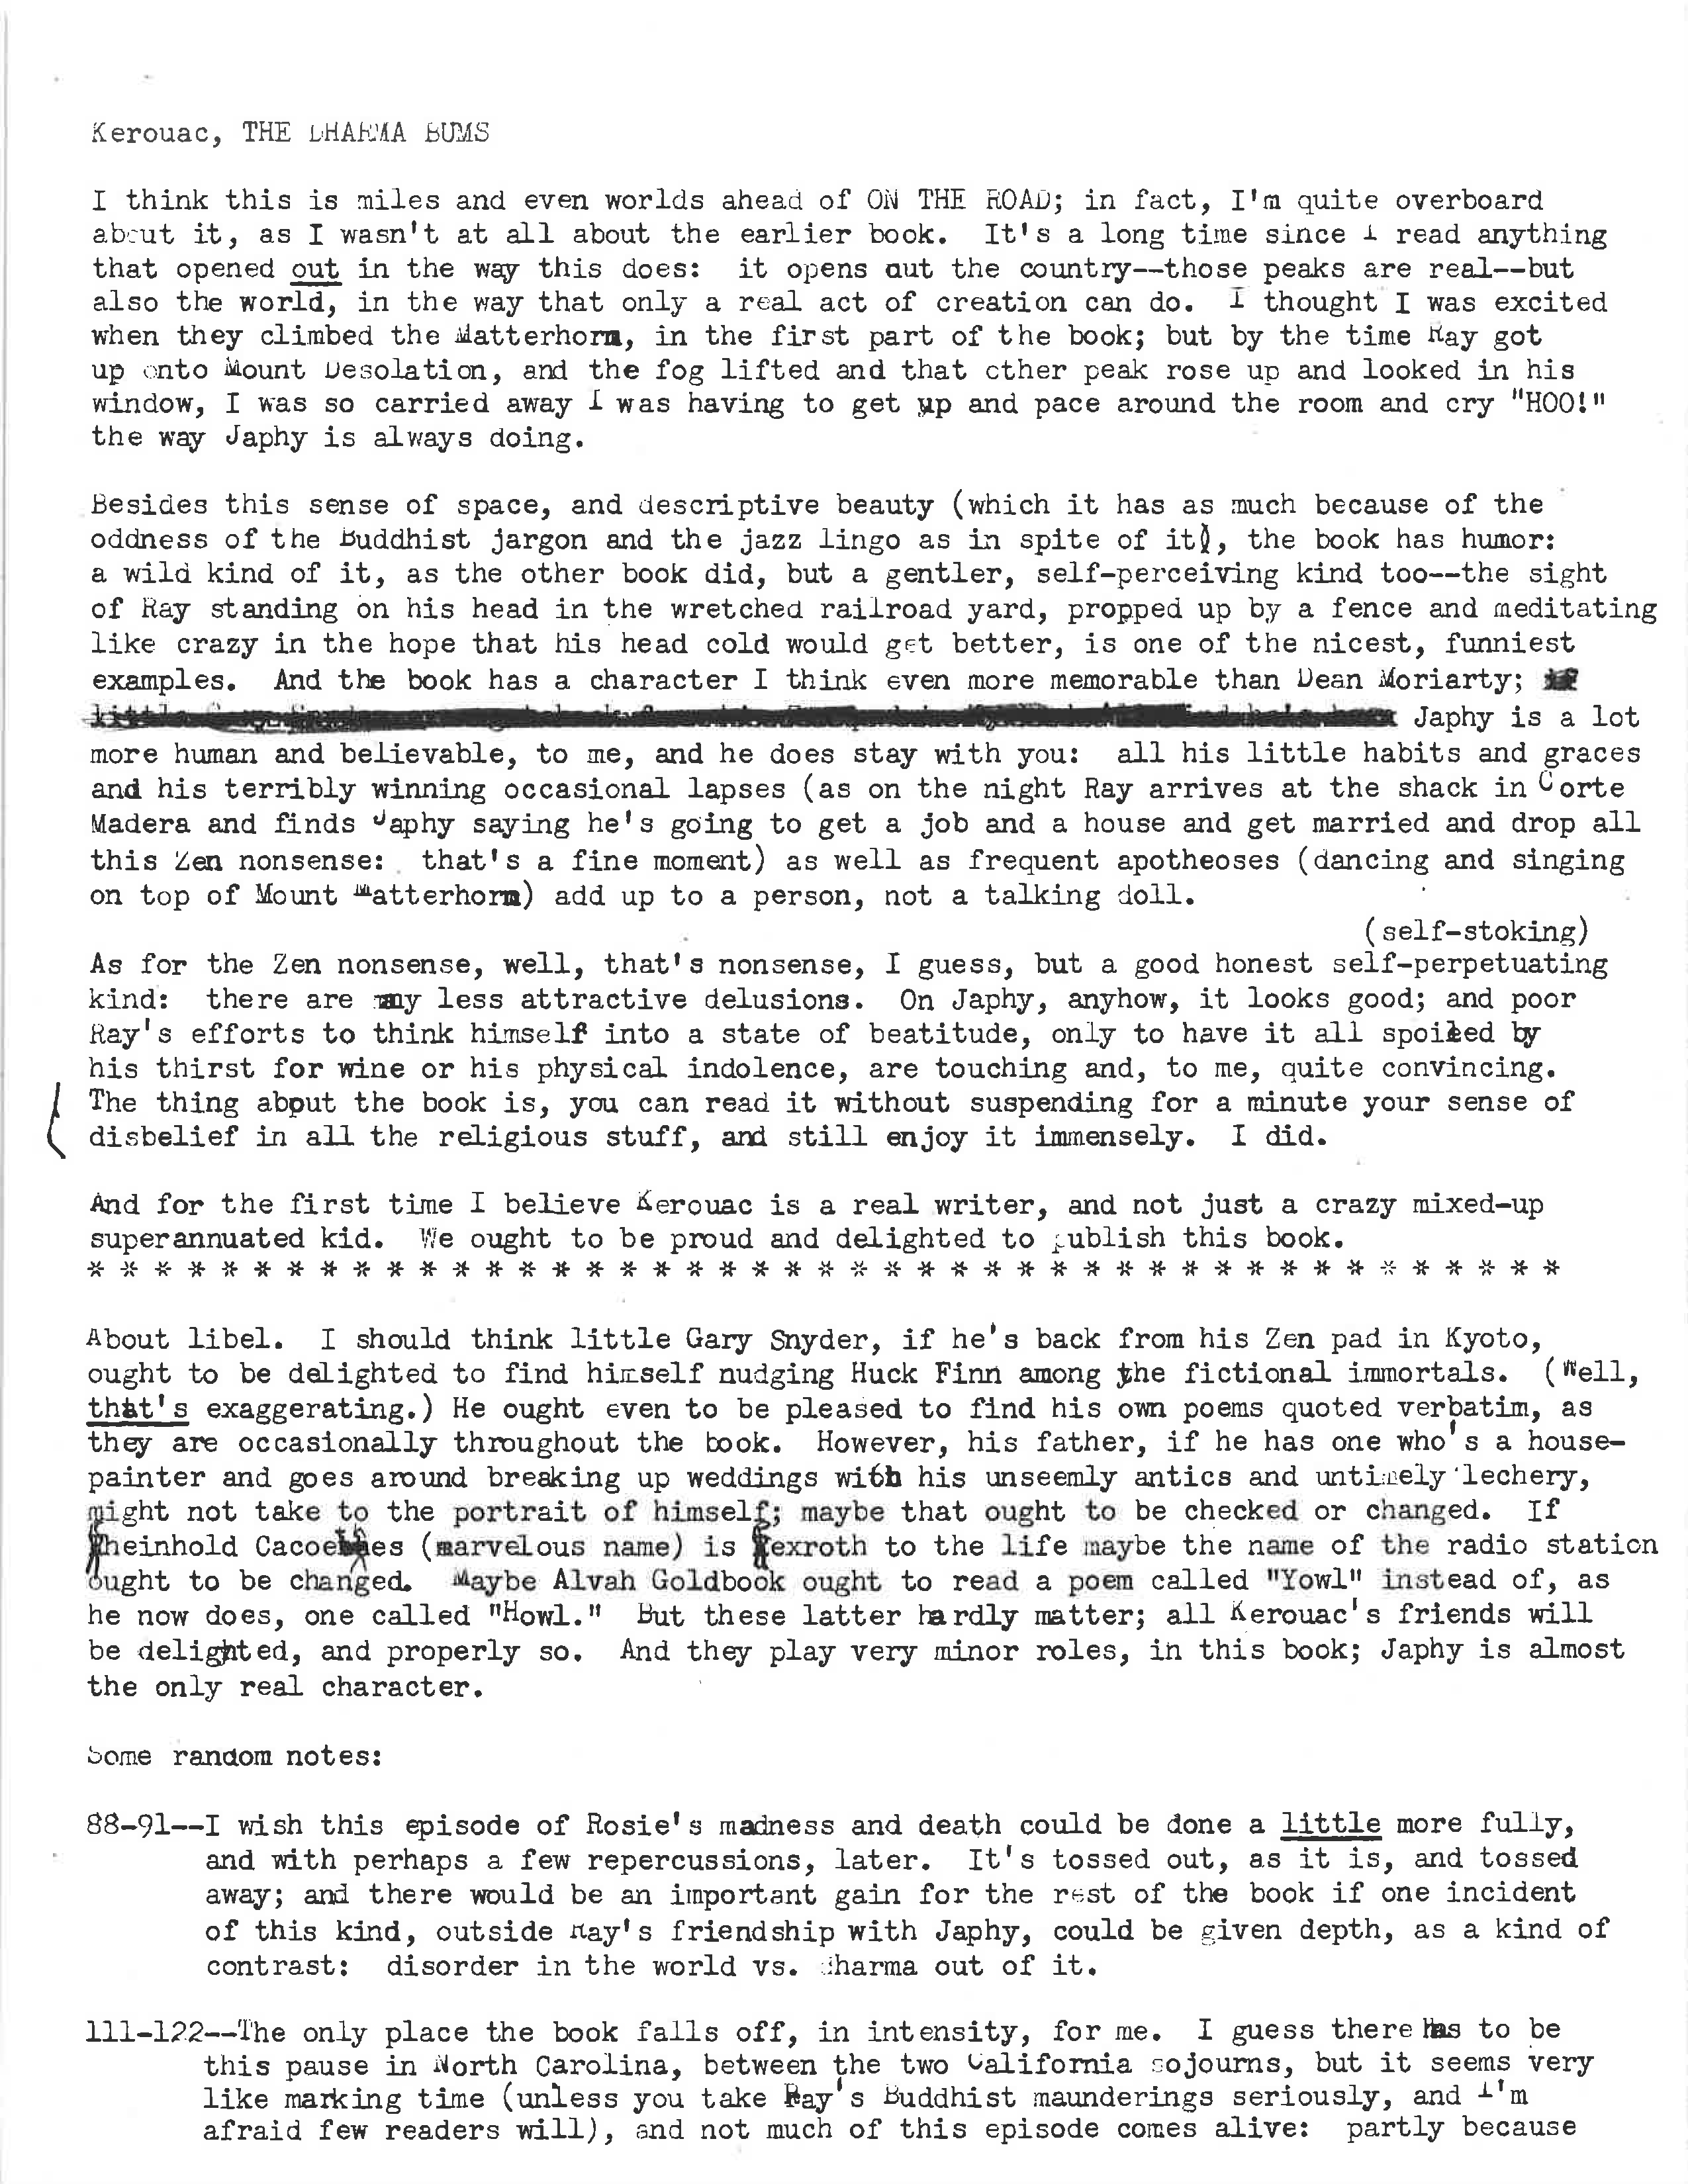 Longer report on The Dharma Bums dated 2/25/58 by Viking editor Catharine Carver